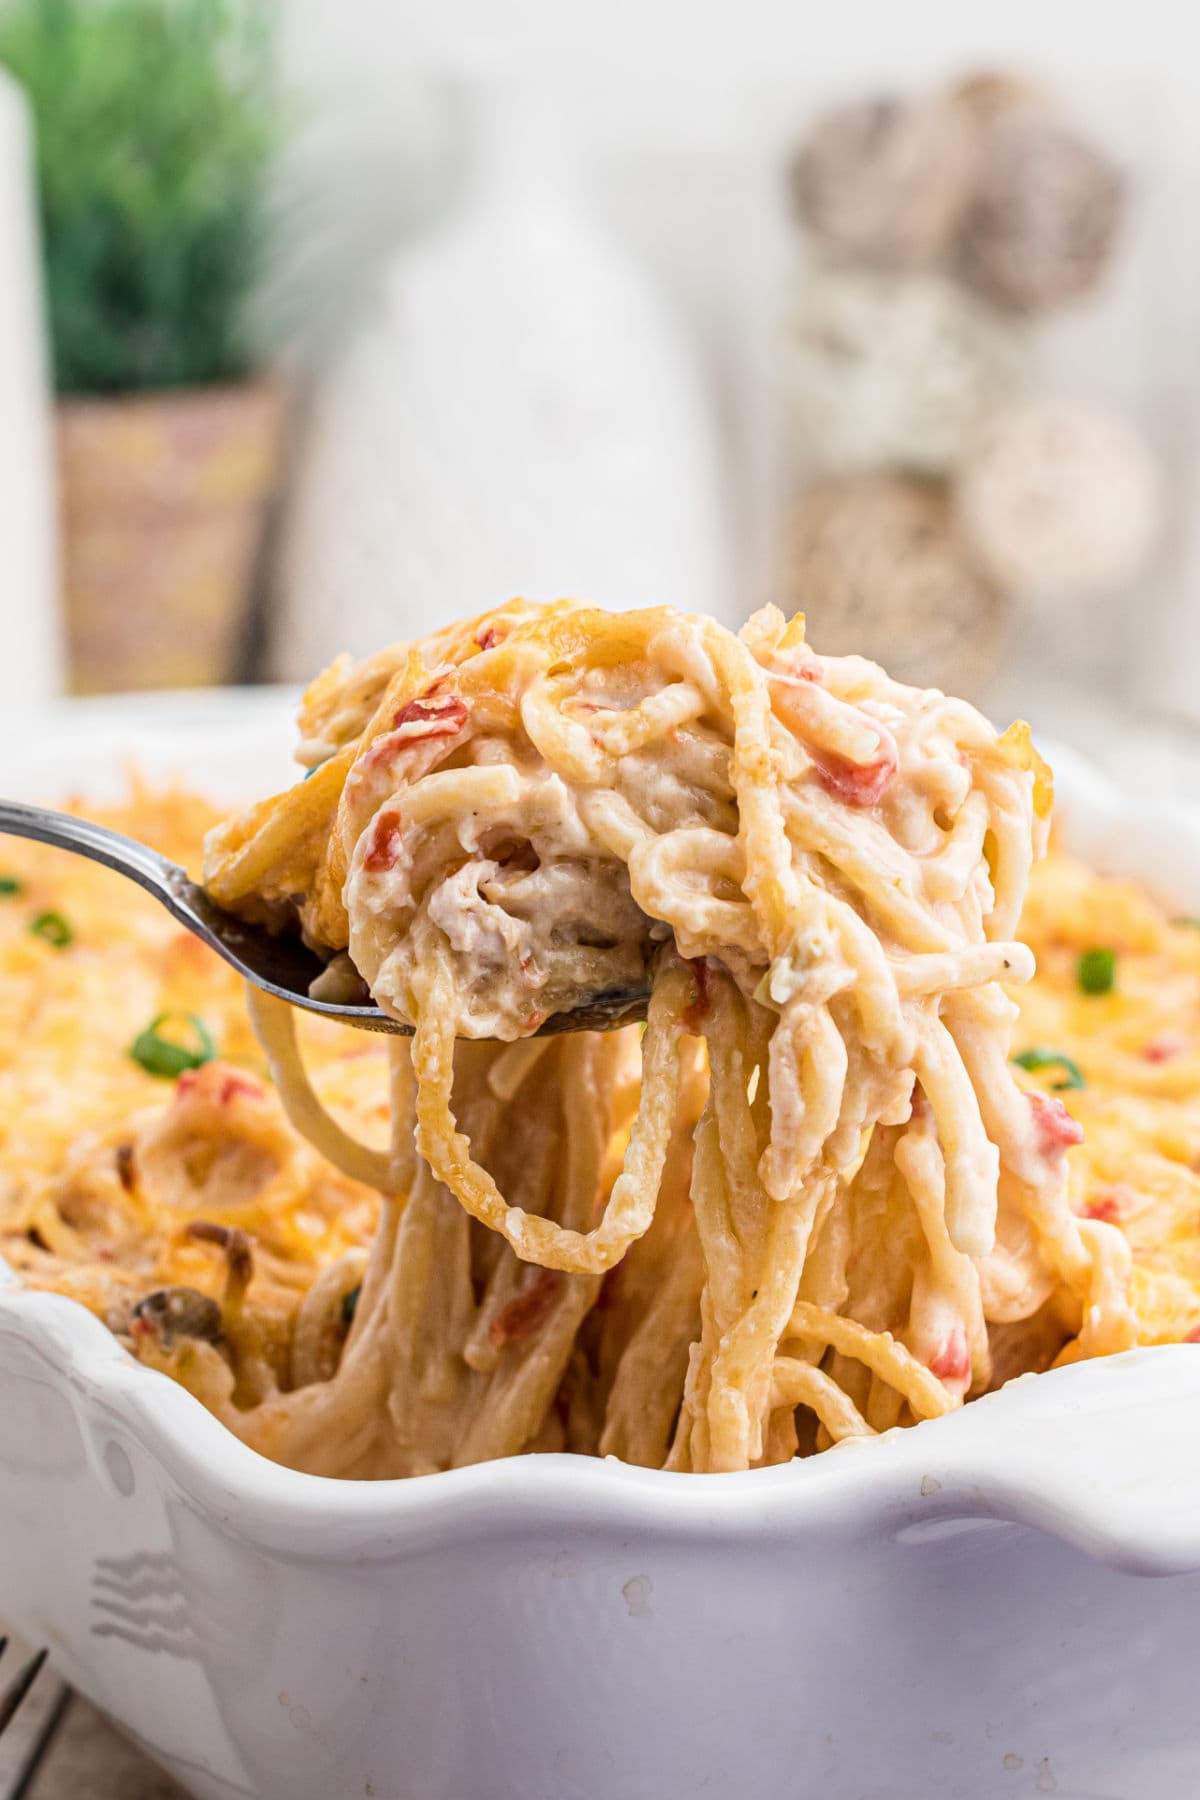 A serving of chicken spaghetti with a thick creamy sauce being removed from the dish.